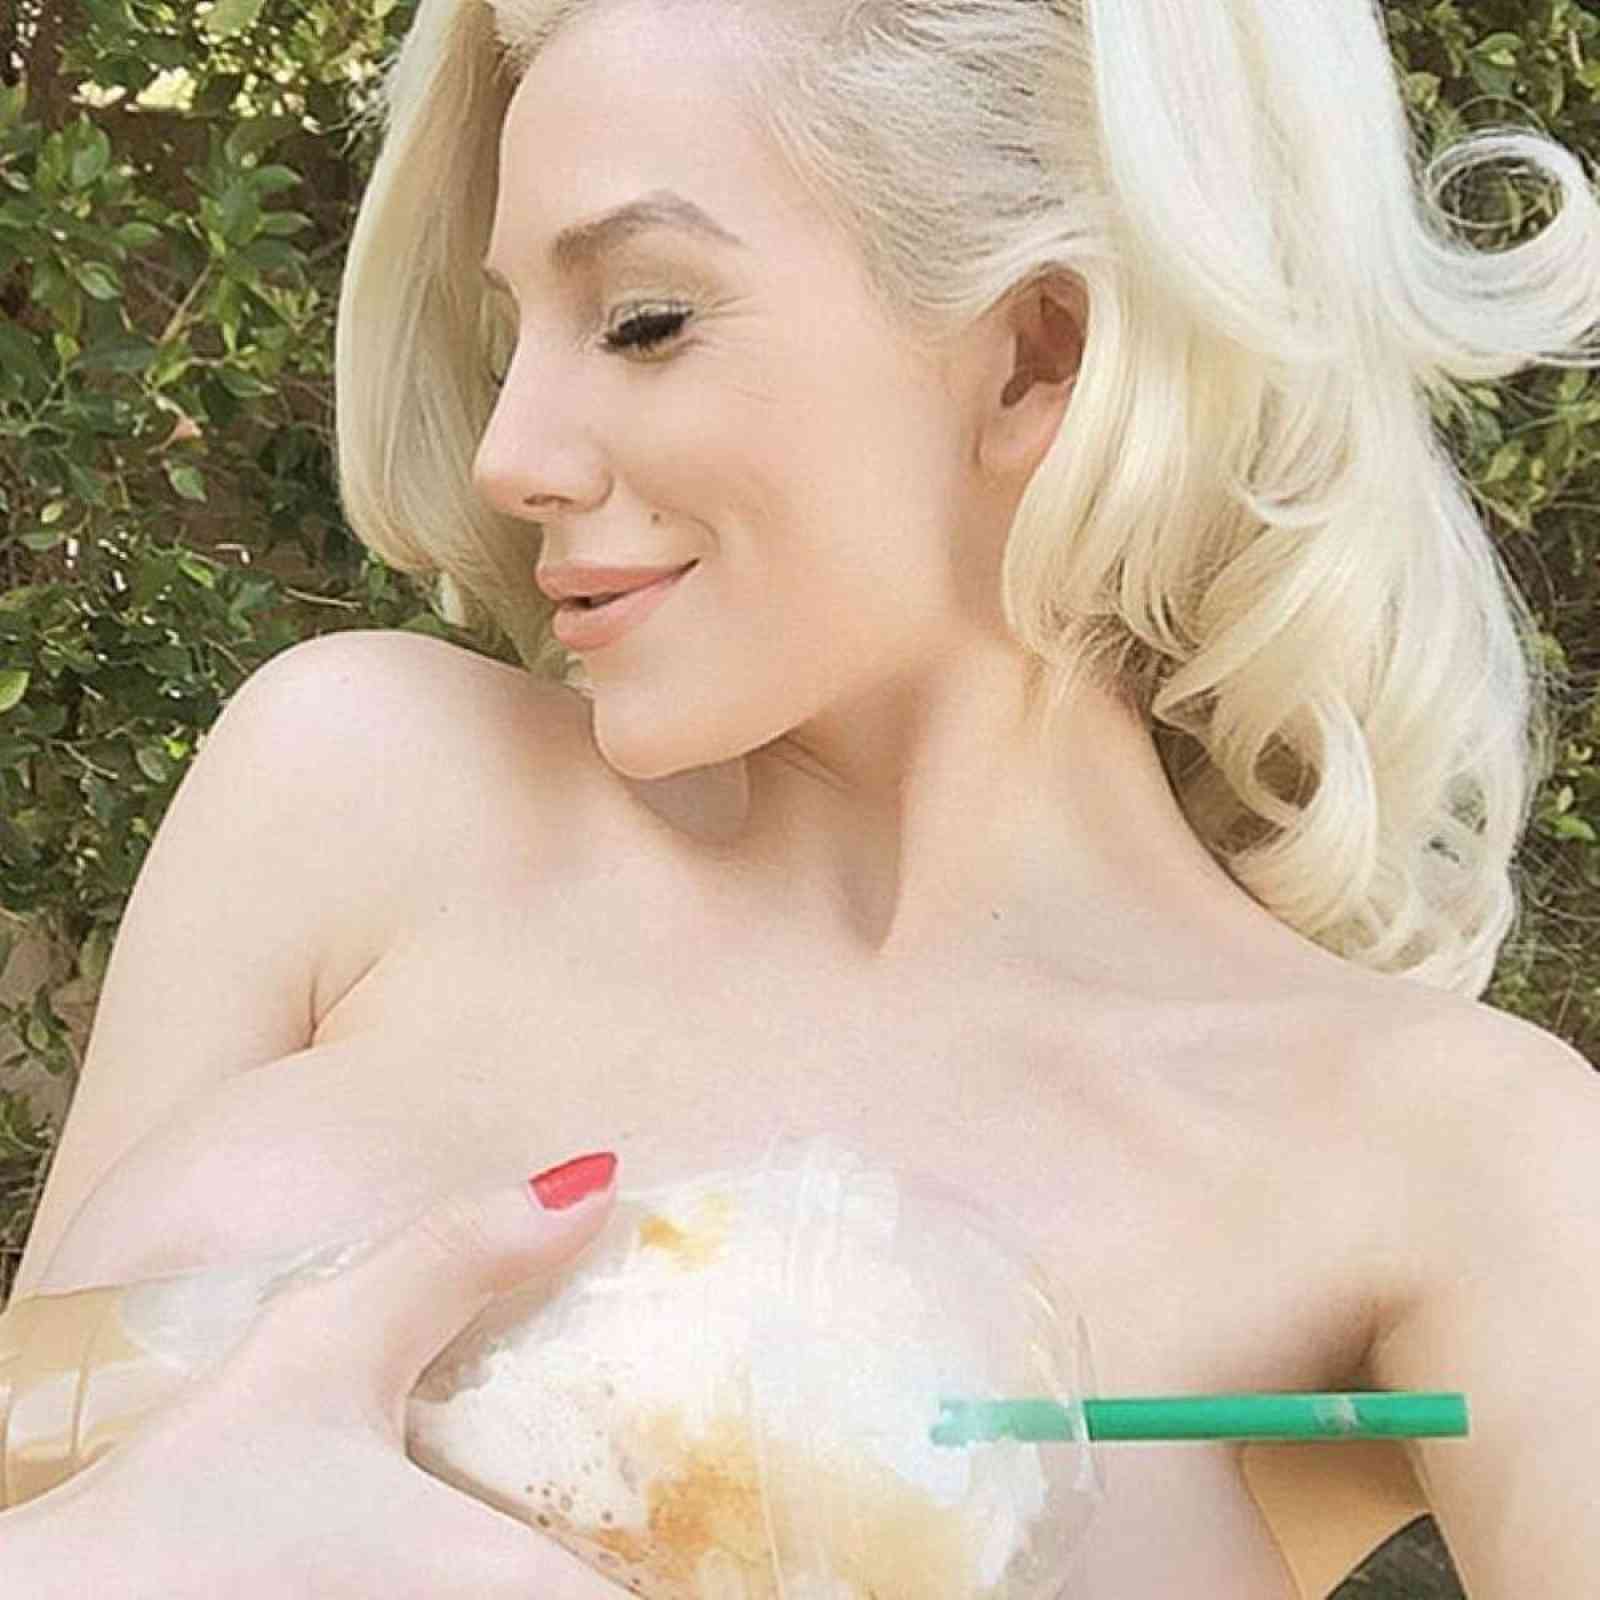 Courtney stodden naked - TheFappening Library